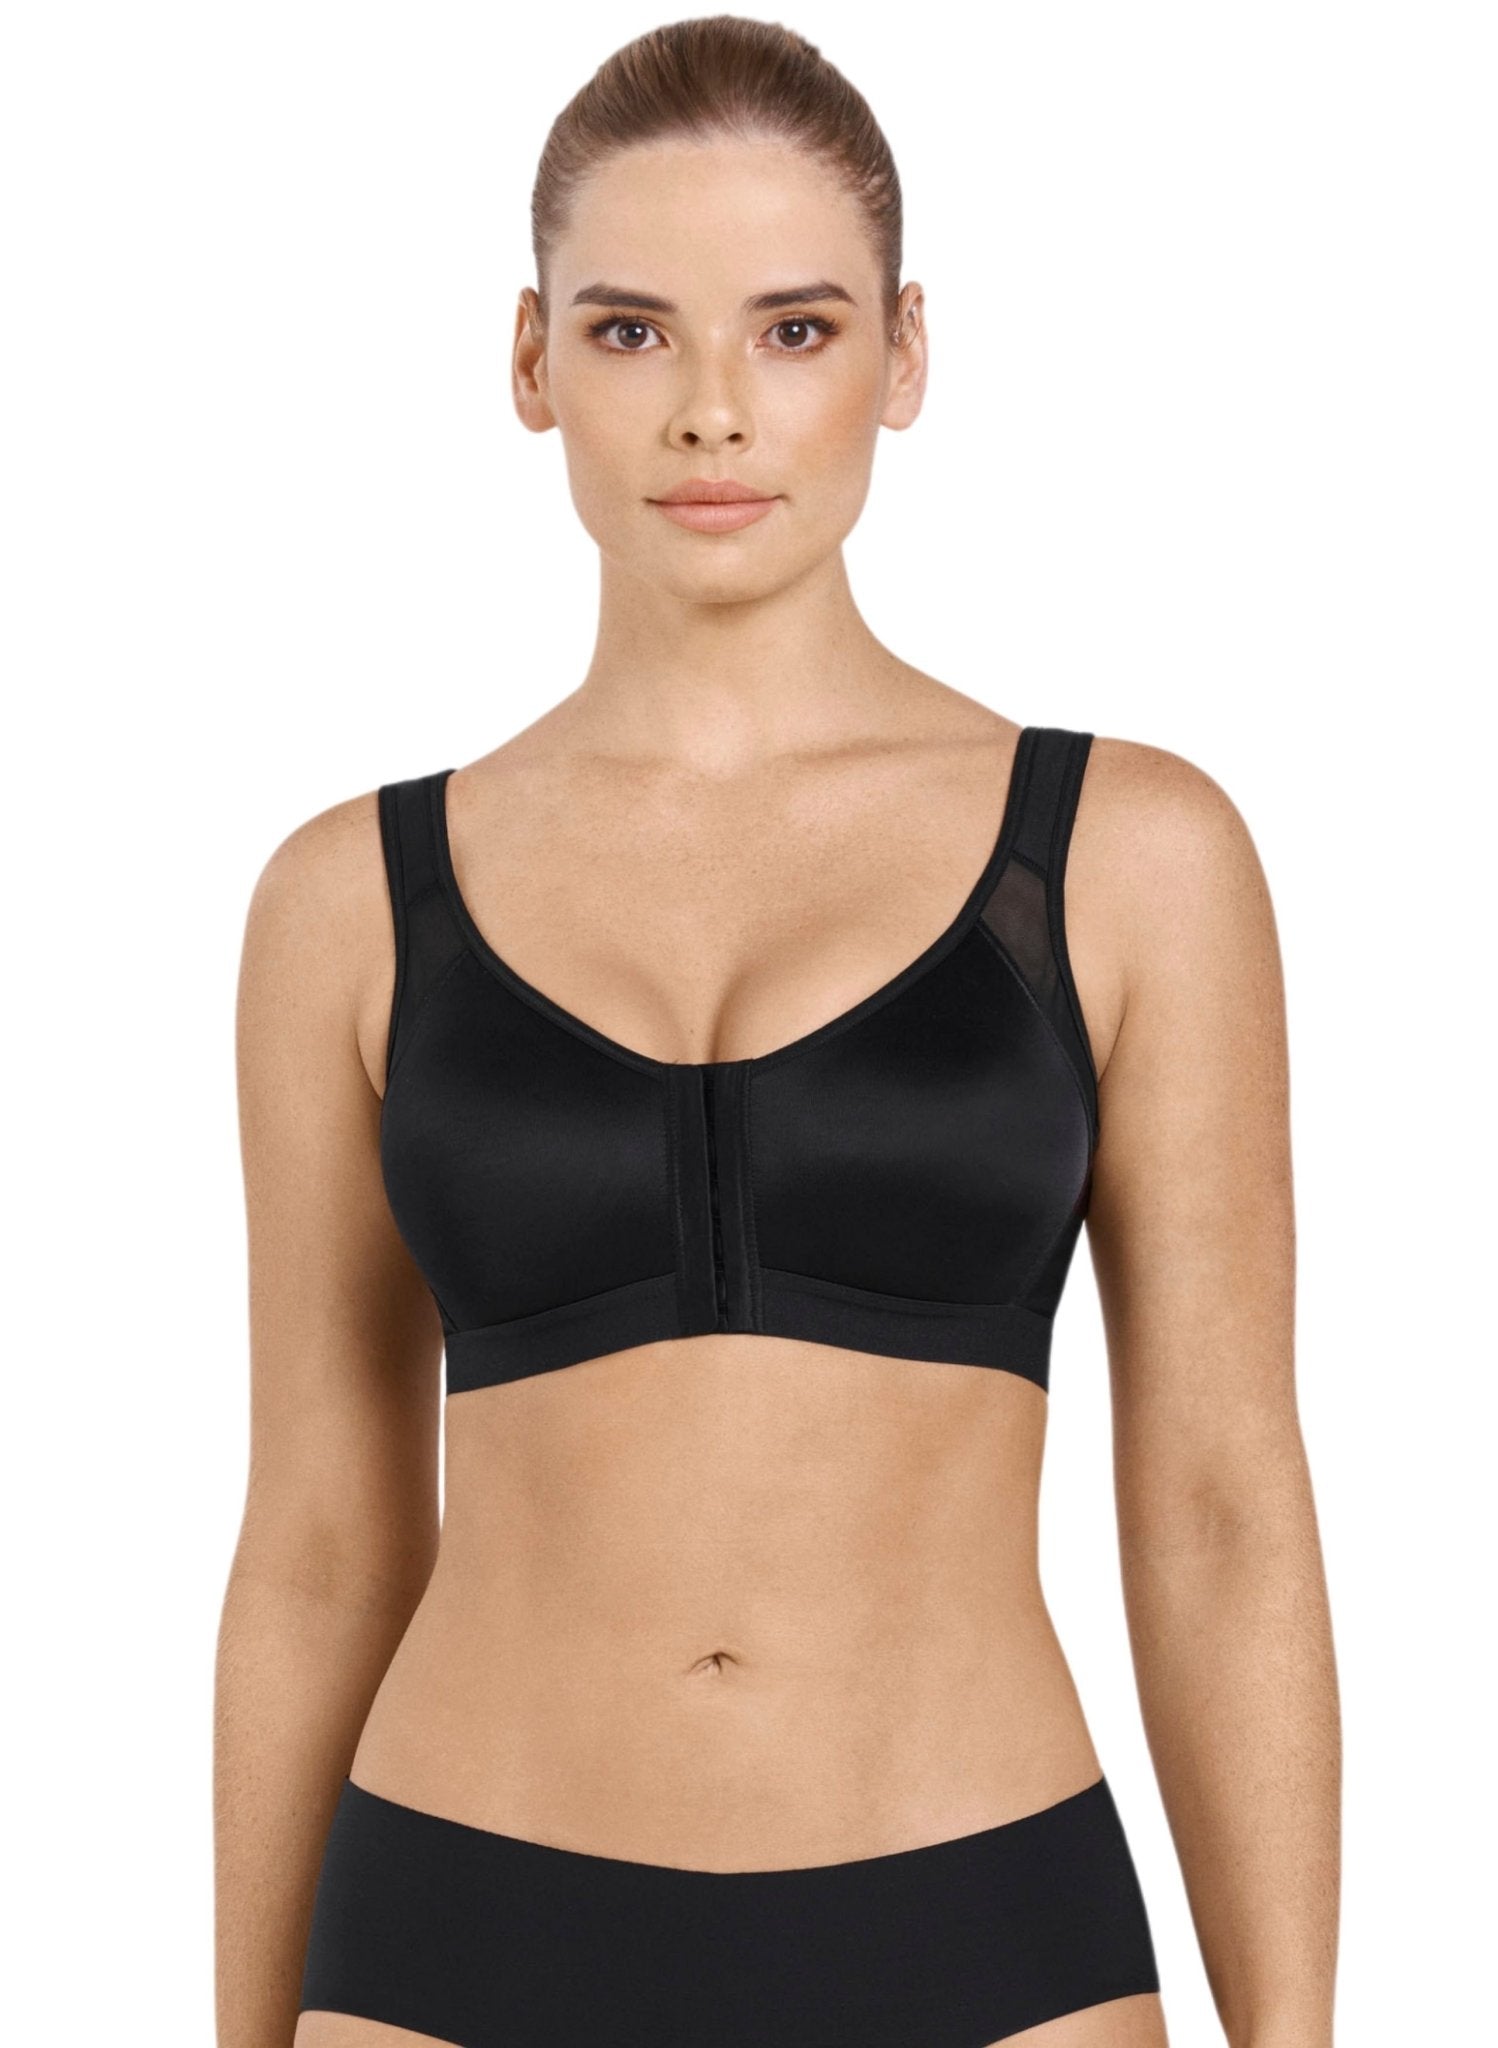 Back Support Posture Corrector Wireless Bra - Black - Mums and Bumps